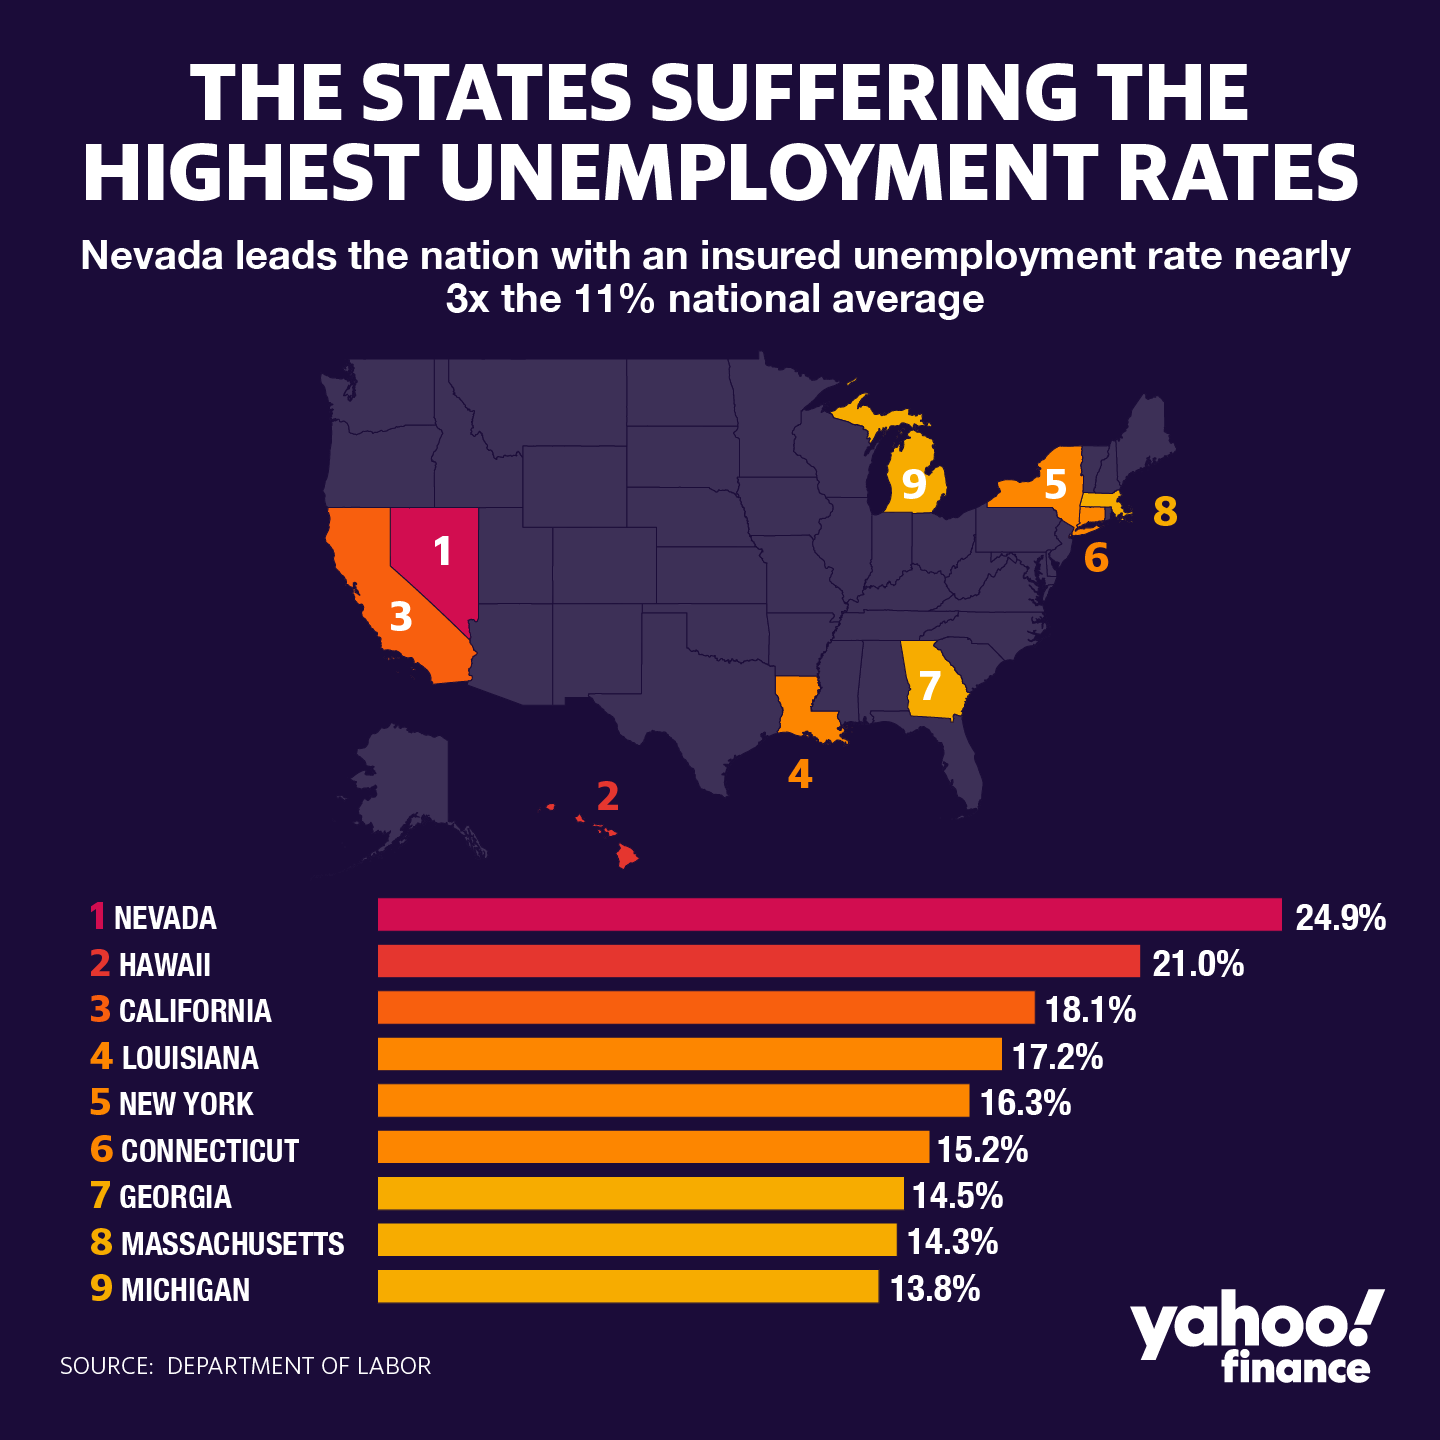 These 9 states are suffering from the worst unemployment rates